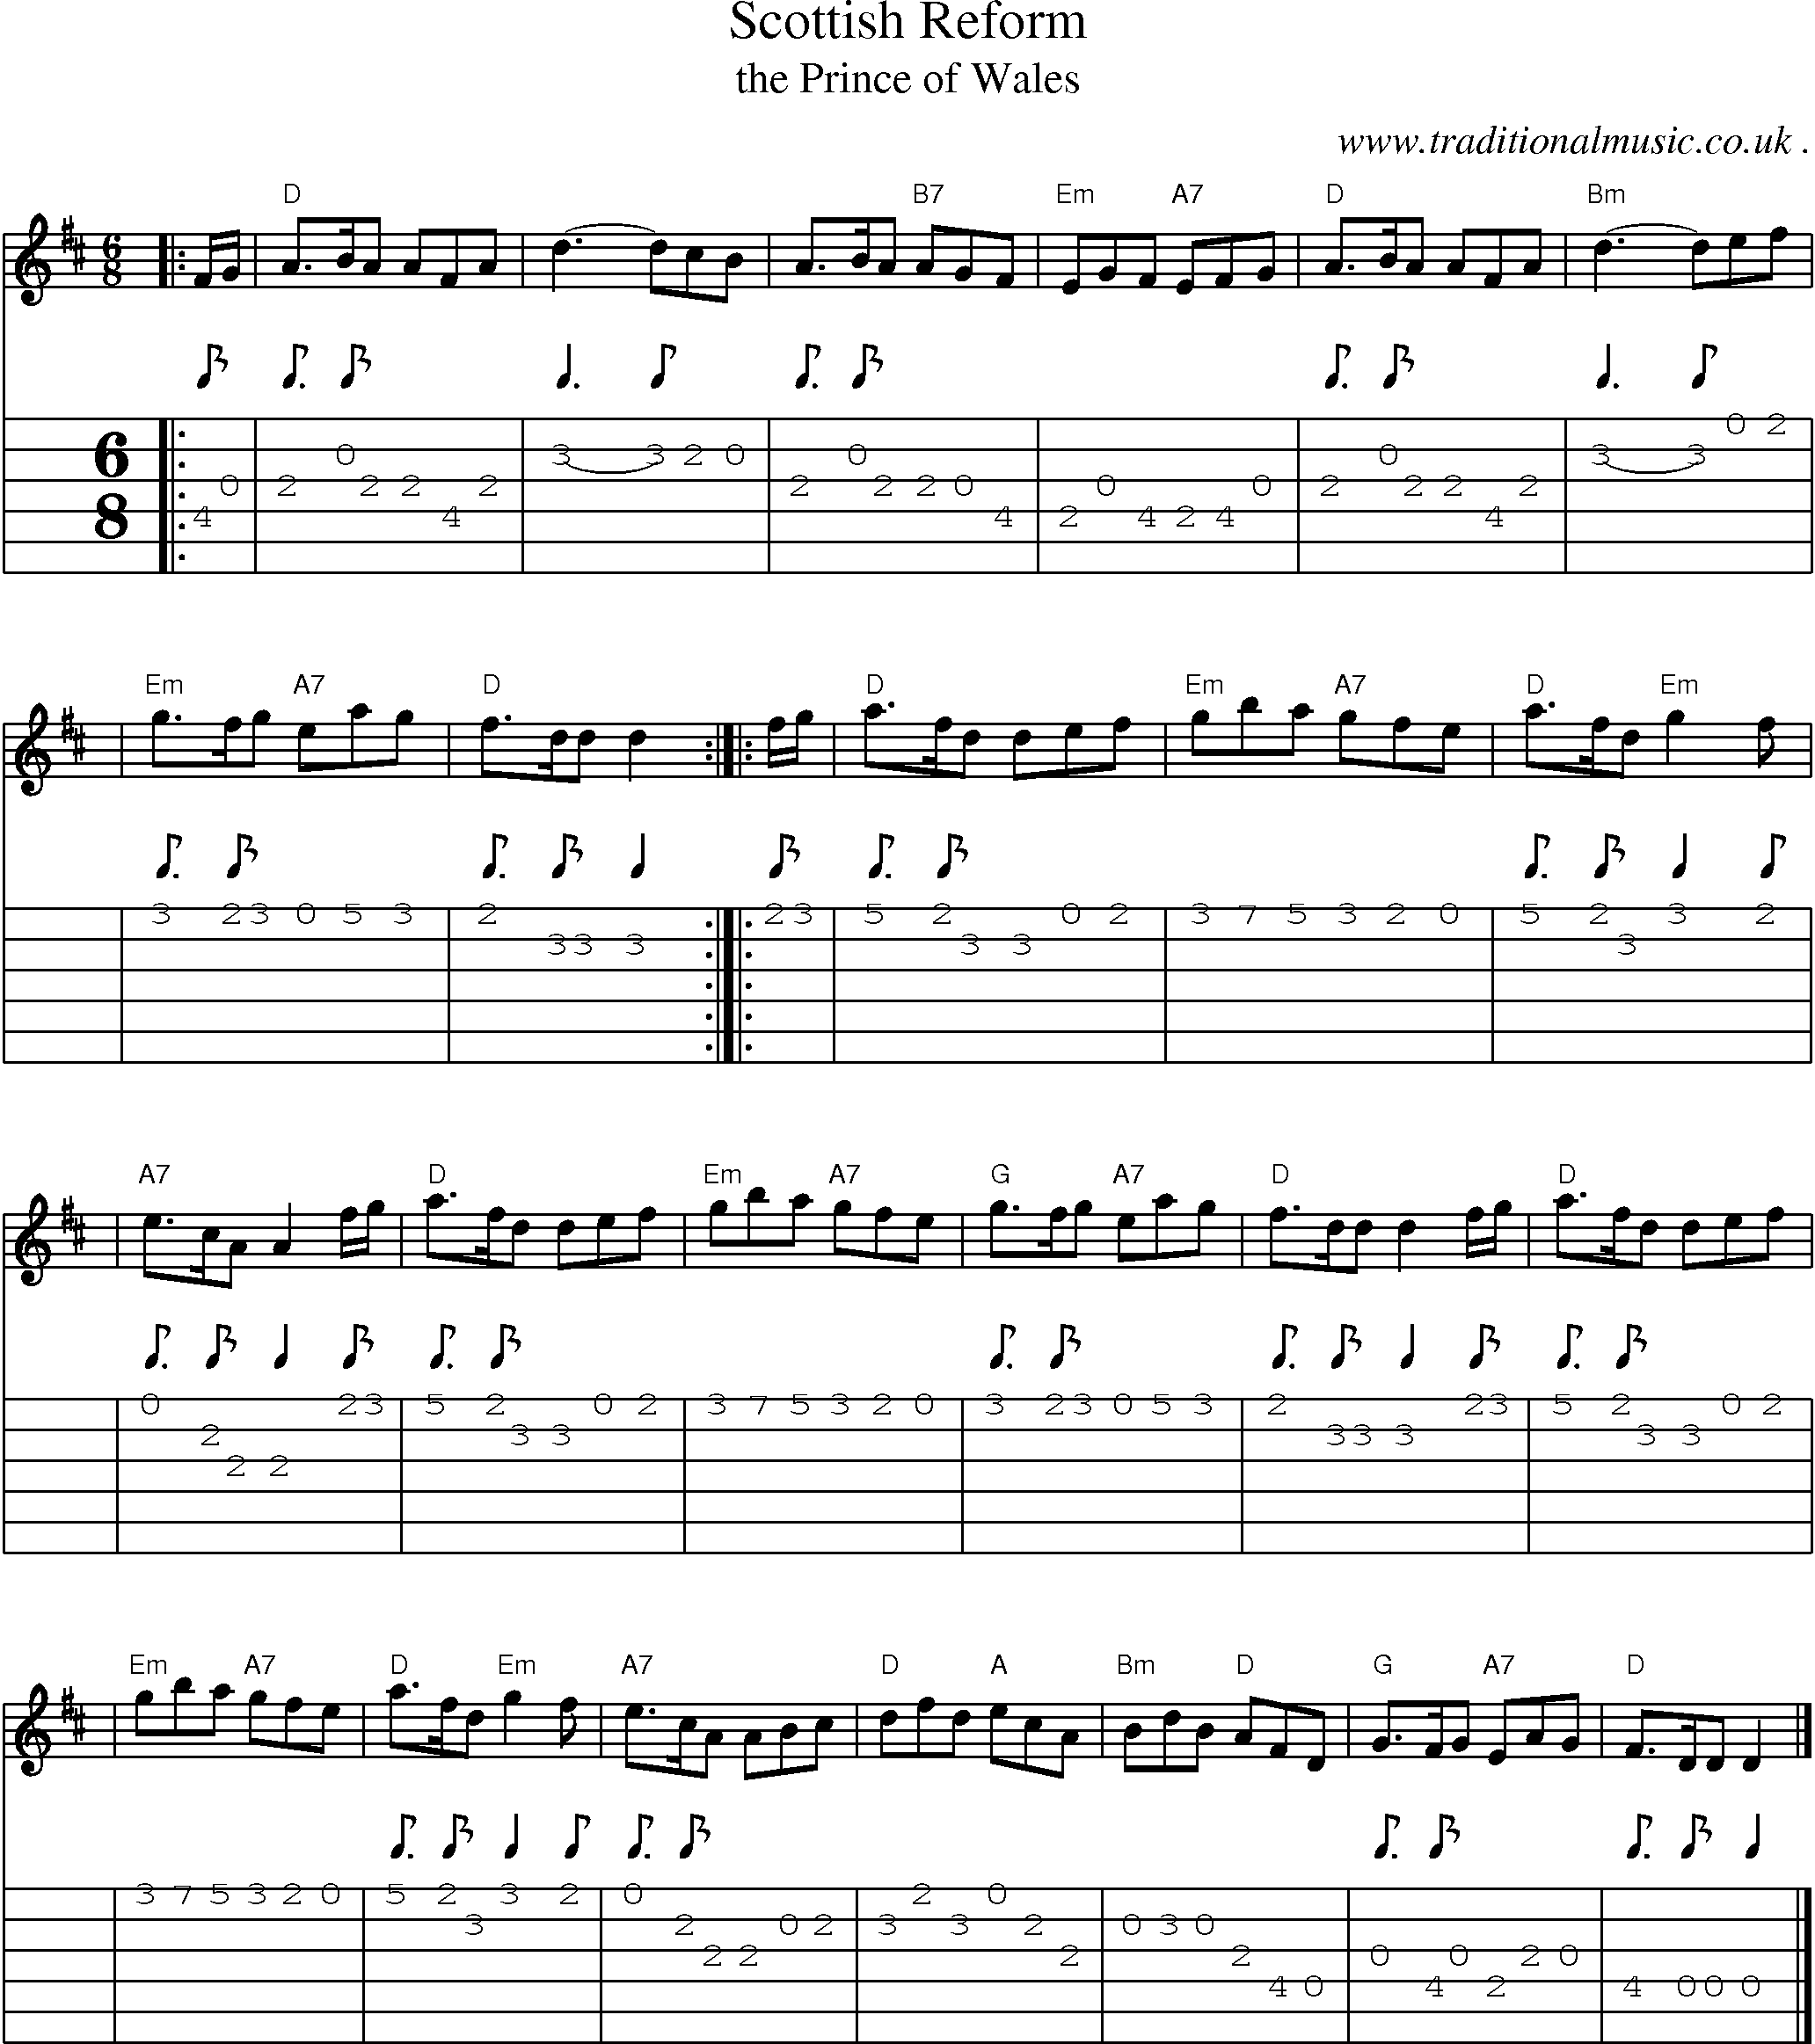 Sheet-music  score, Chords and Guitar Tabs for Scottish Reform